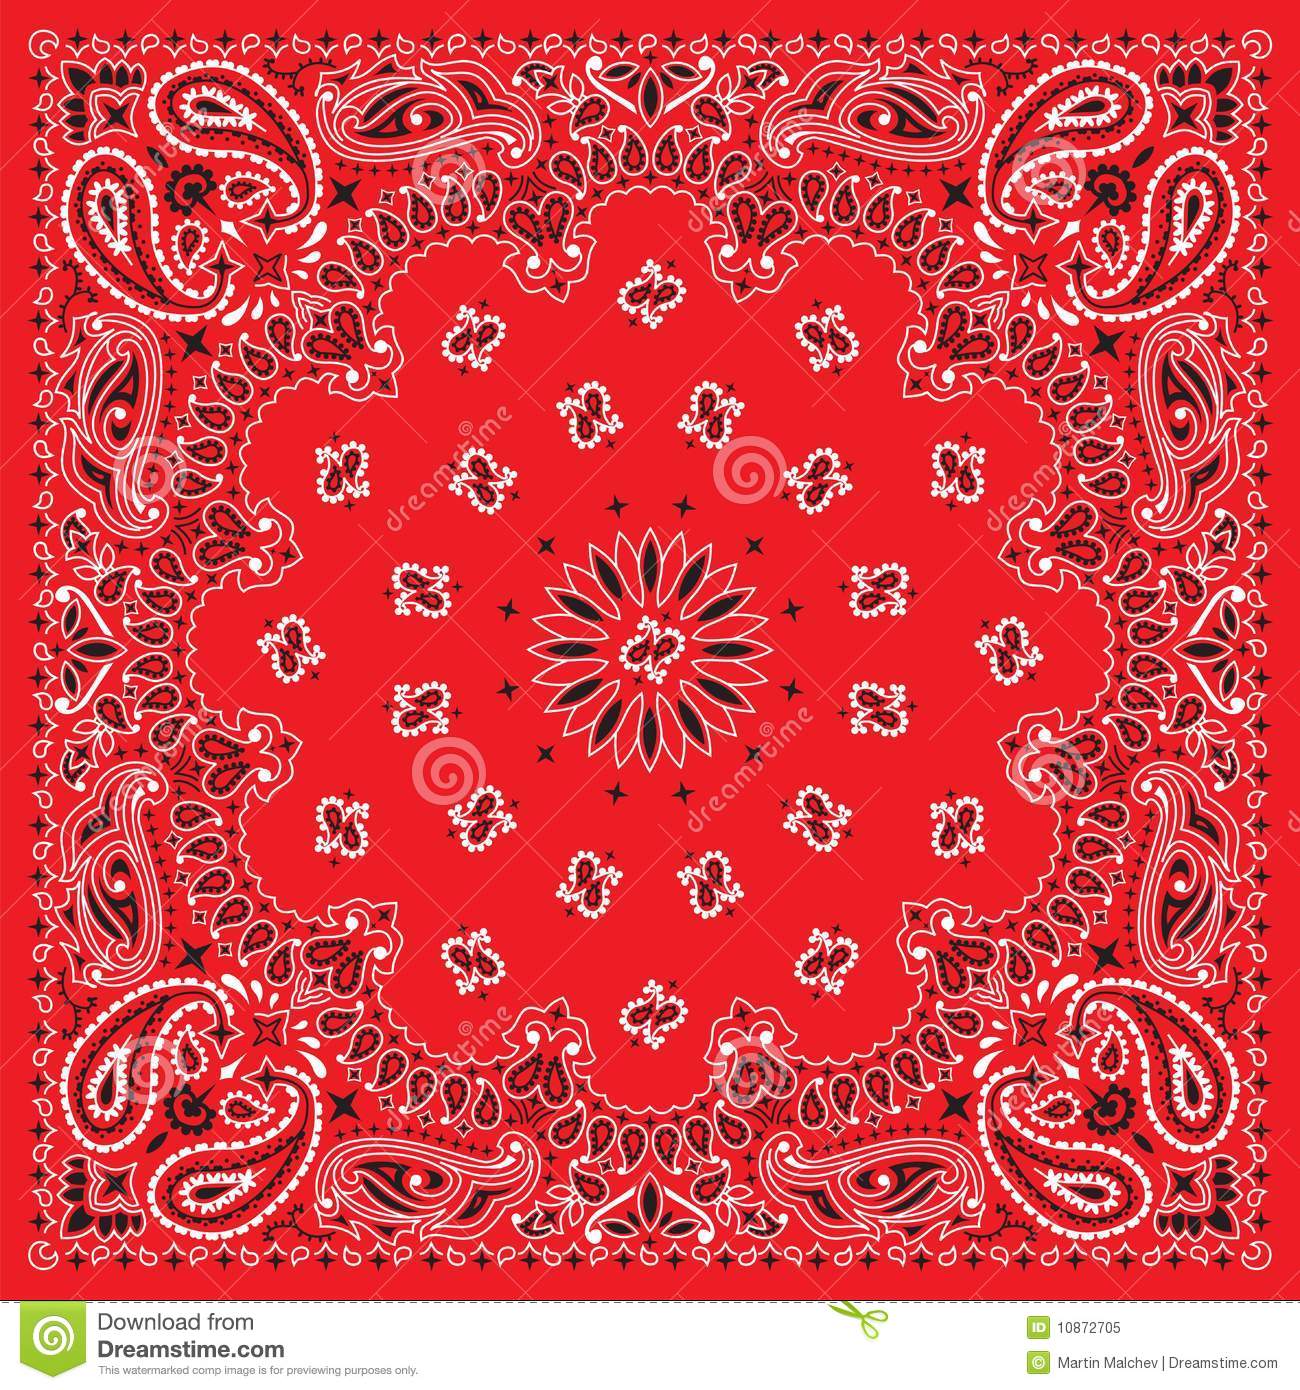 Colors Bandana  You Can Easily Change The Background Color In The    